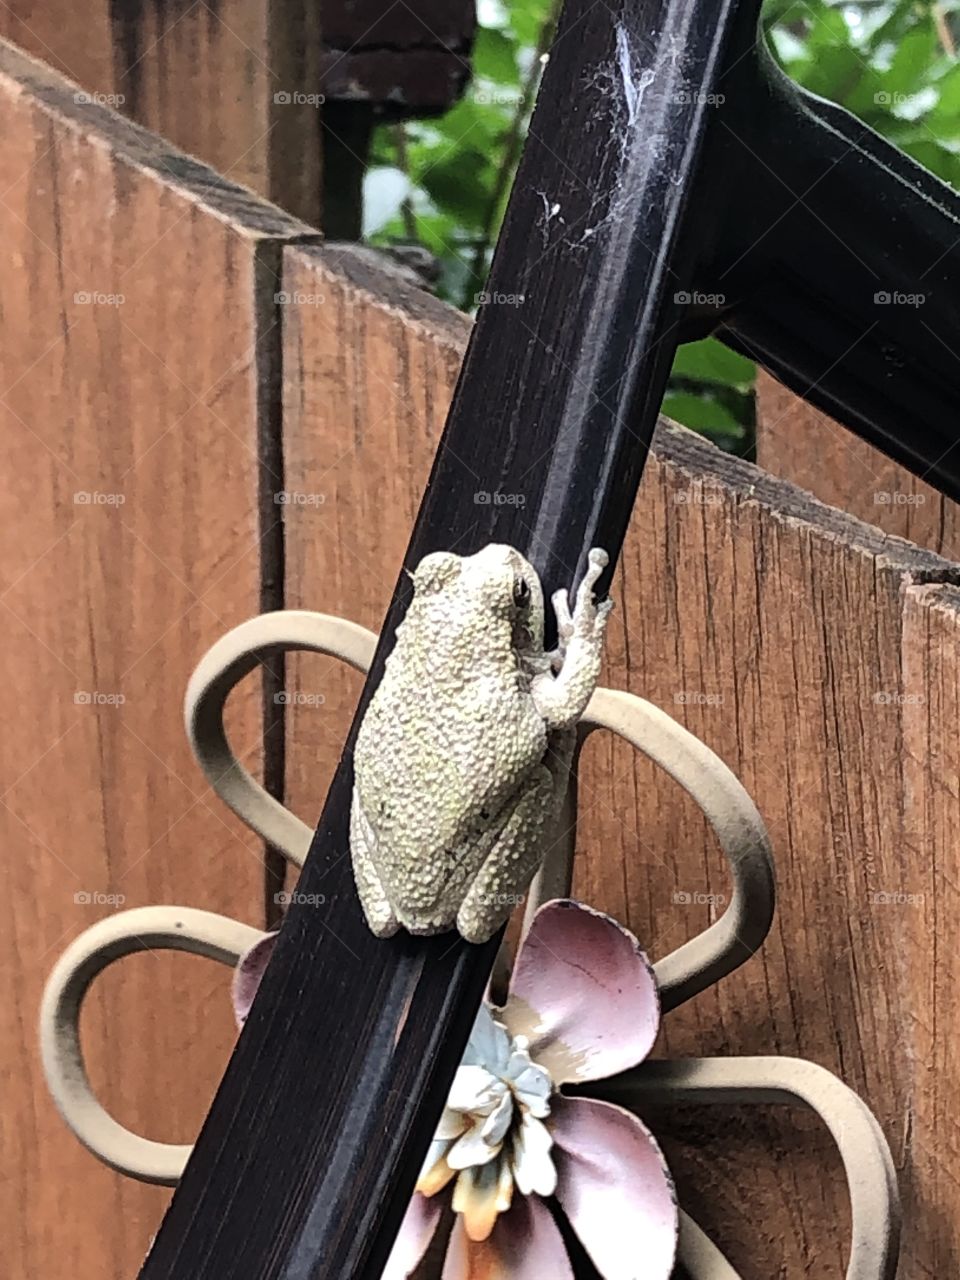 Frog giving me the Bird! 